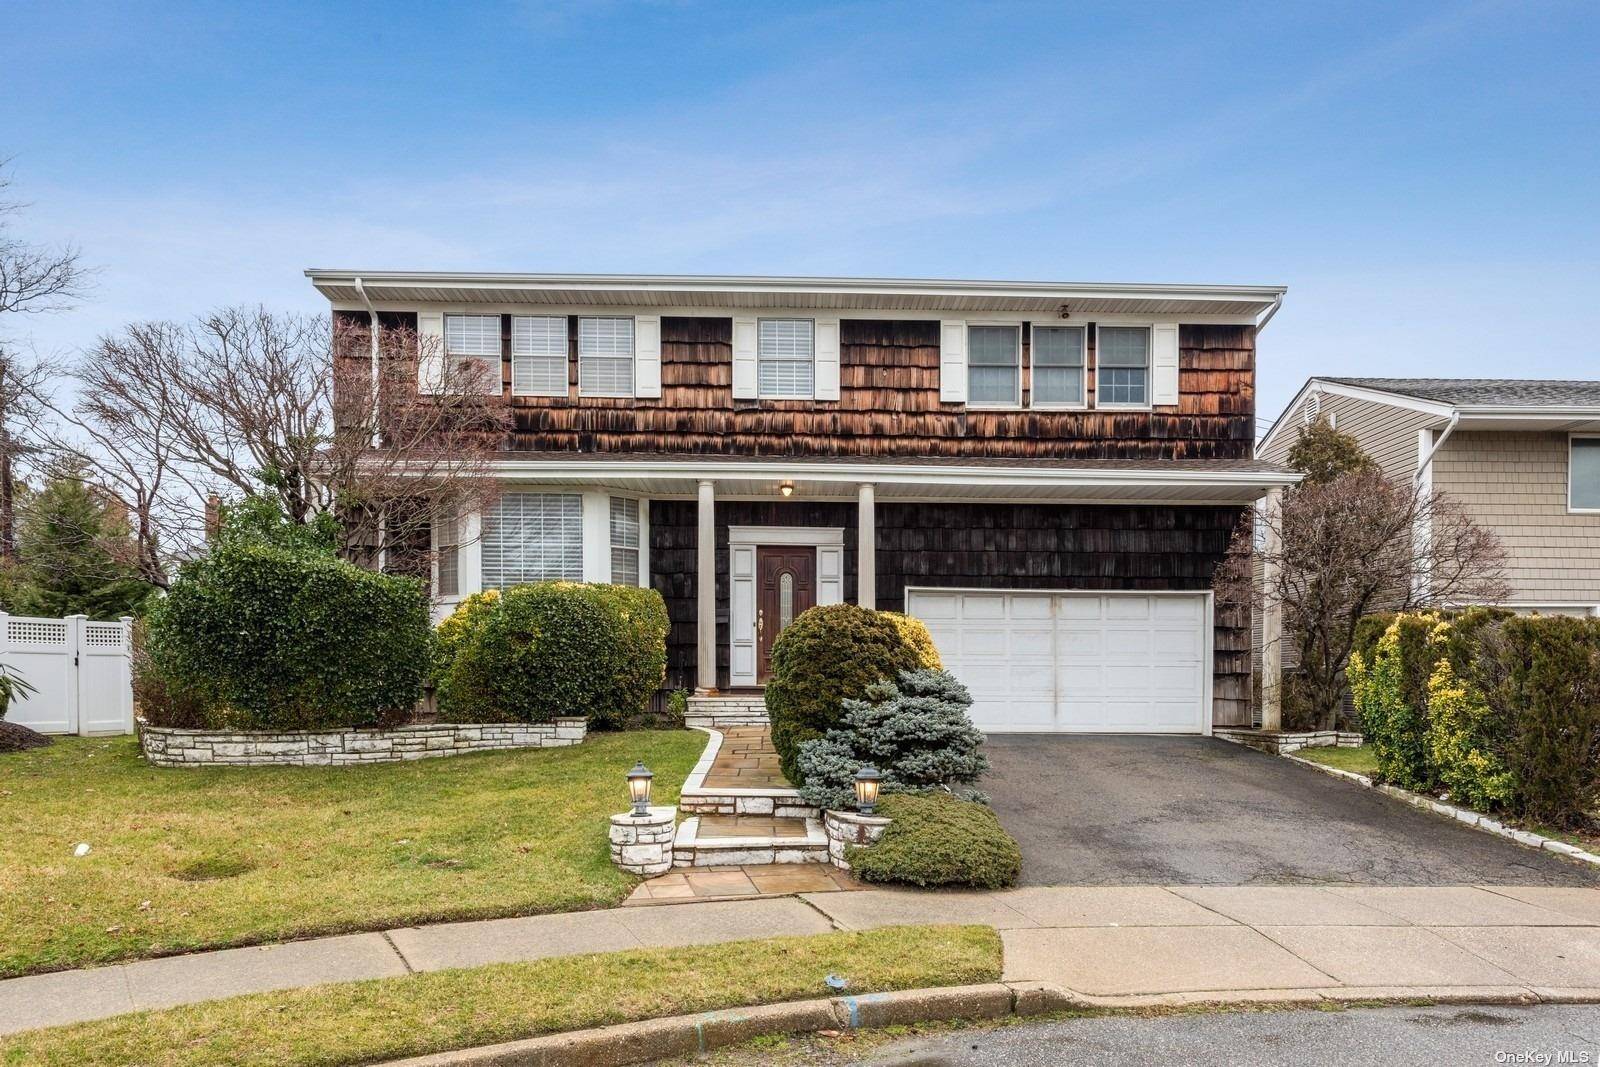 Fabulous 6 Bedroom, 2. 5 Bathroom Colonial for Sale On a Cul De Sac in North Woodmere.